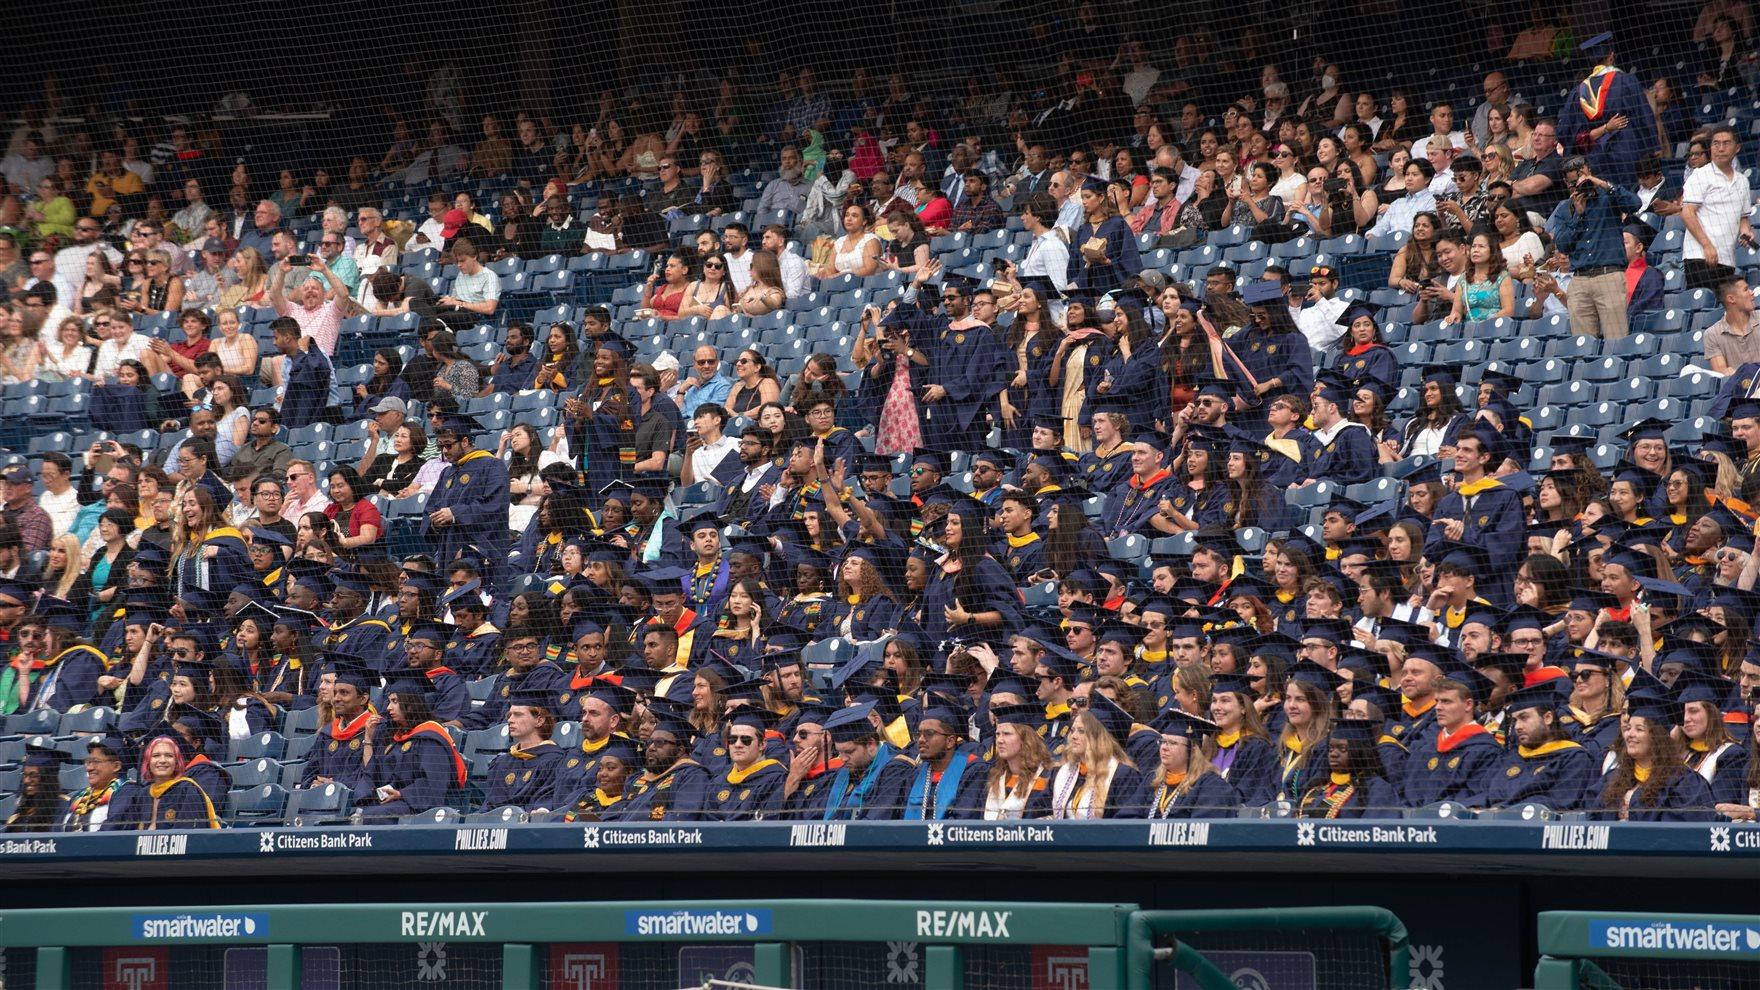 Students in the stands at Citizens bank Park for Commencement